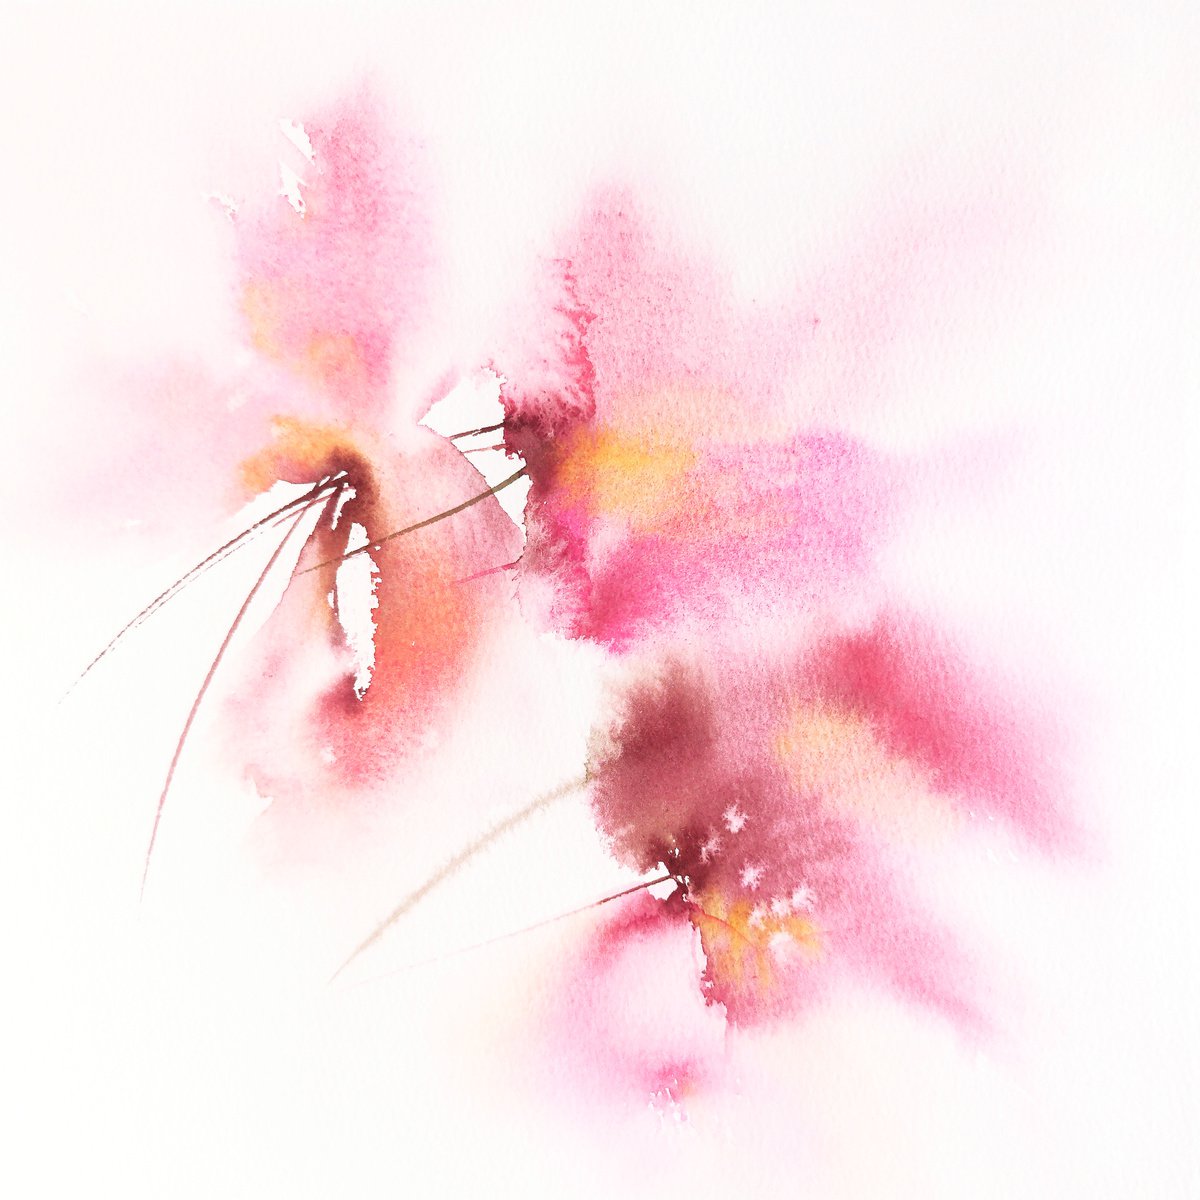 Pink abstract flowers watercolor painting by Olya Grigo